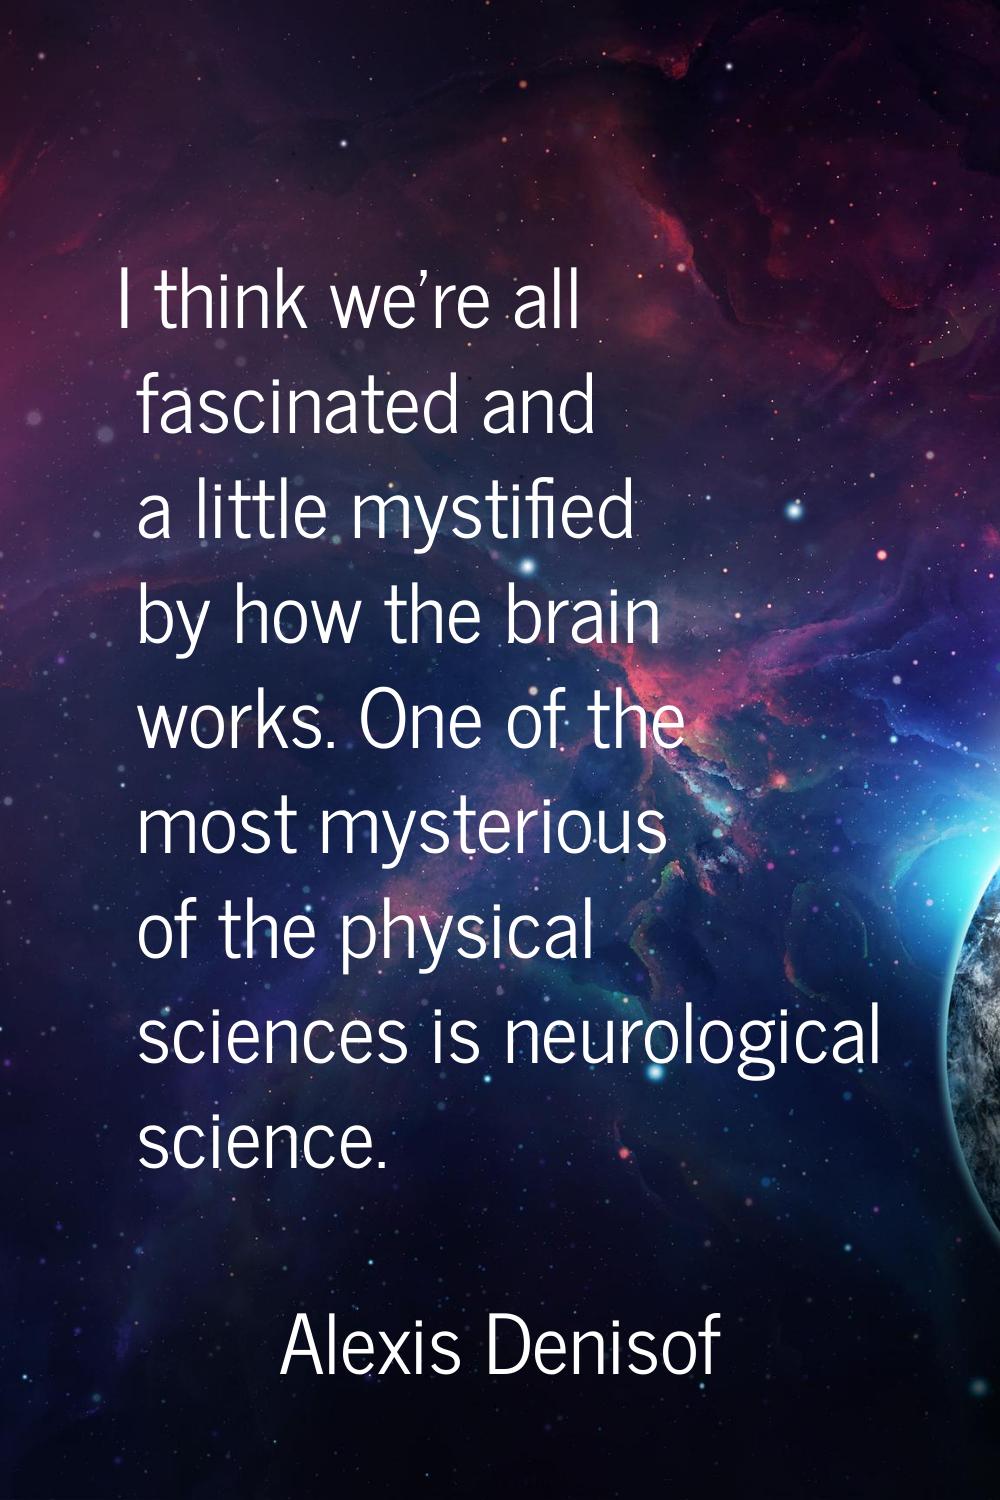 I think we're all fascinated and a little mystified by how the brain works. One of the most mysteri